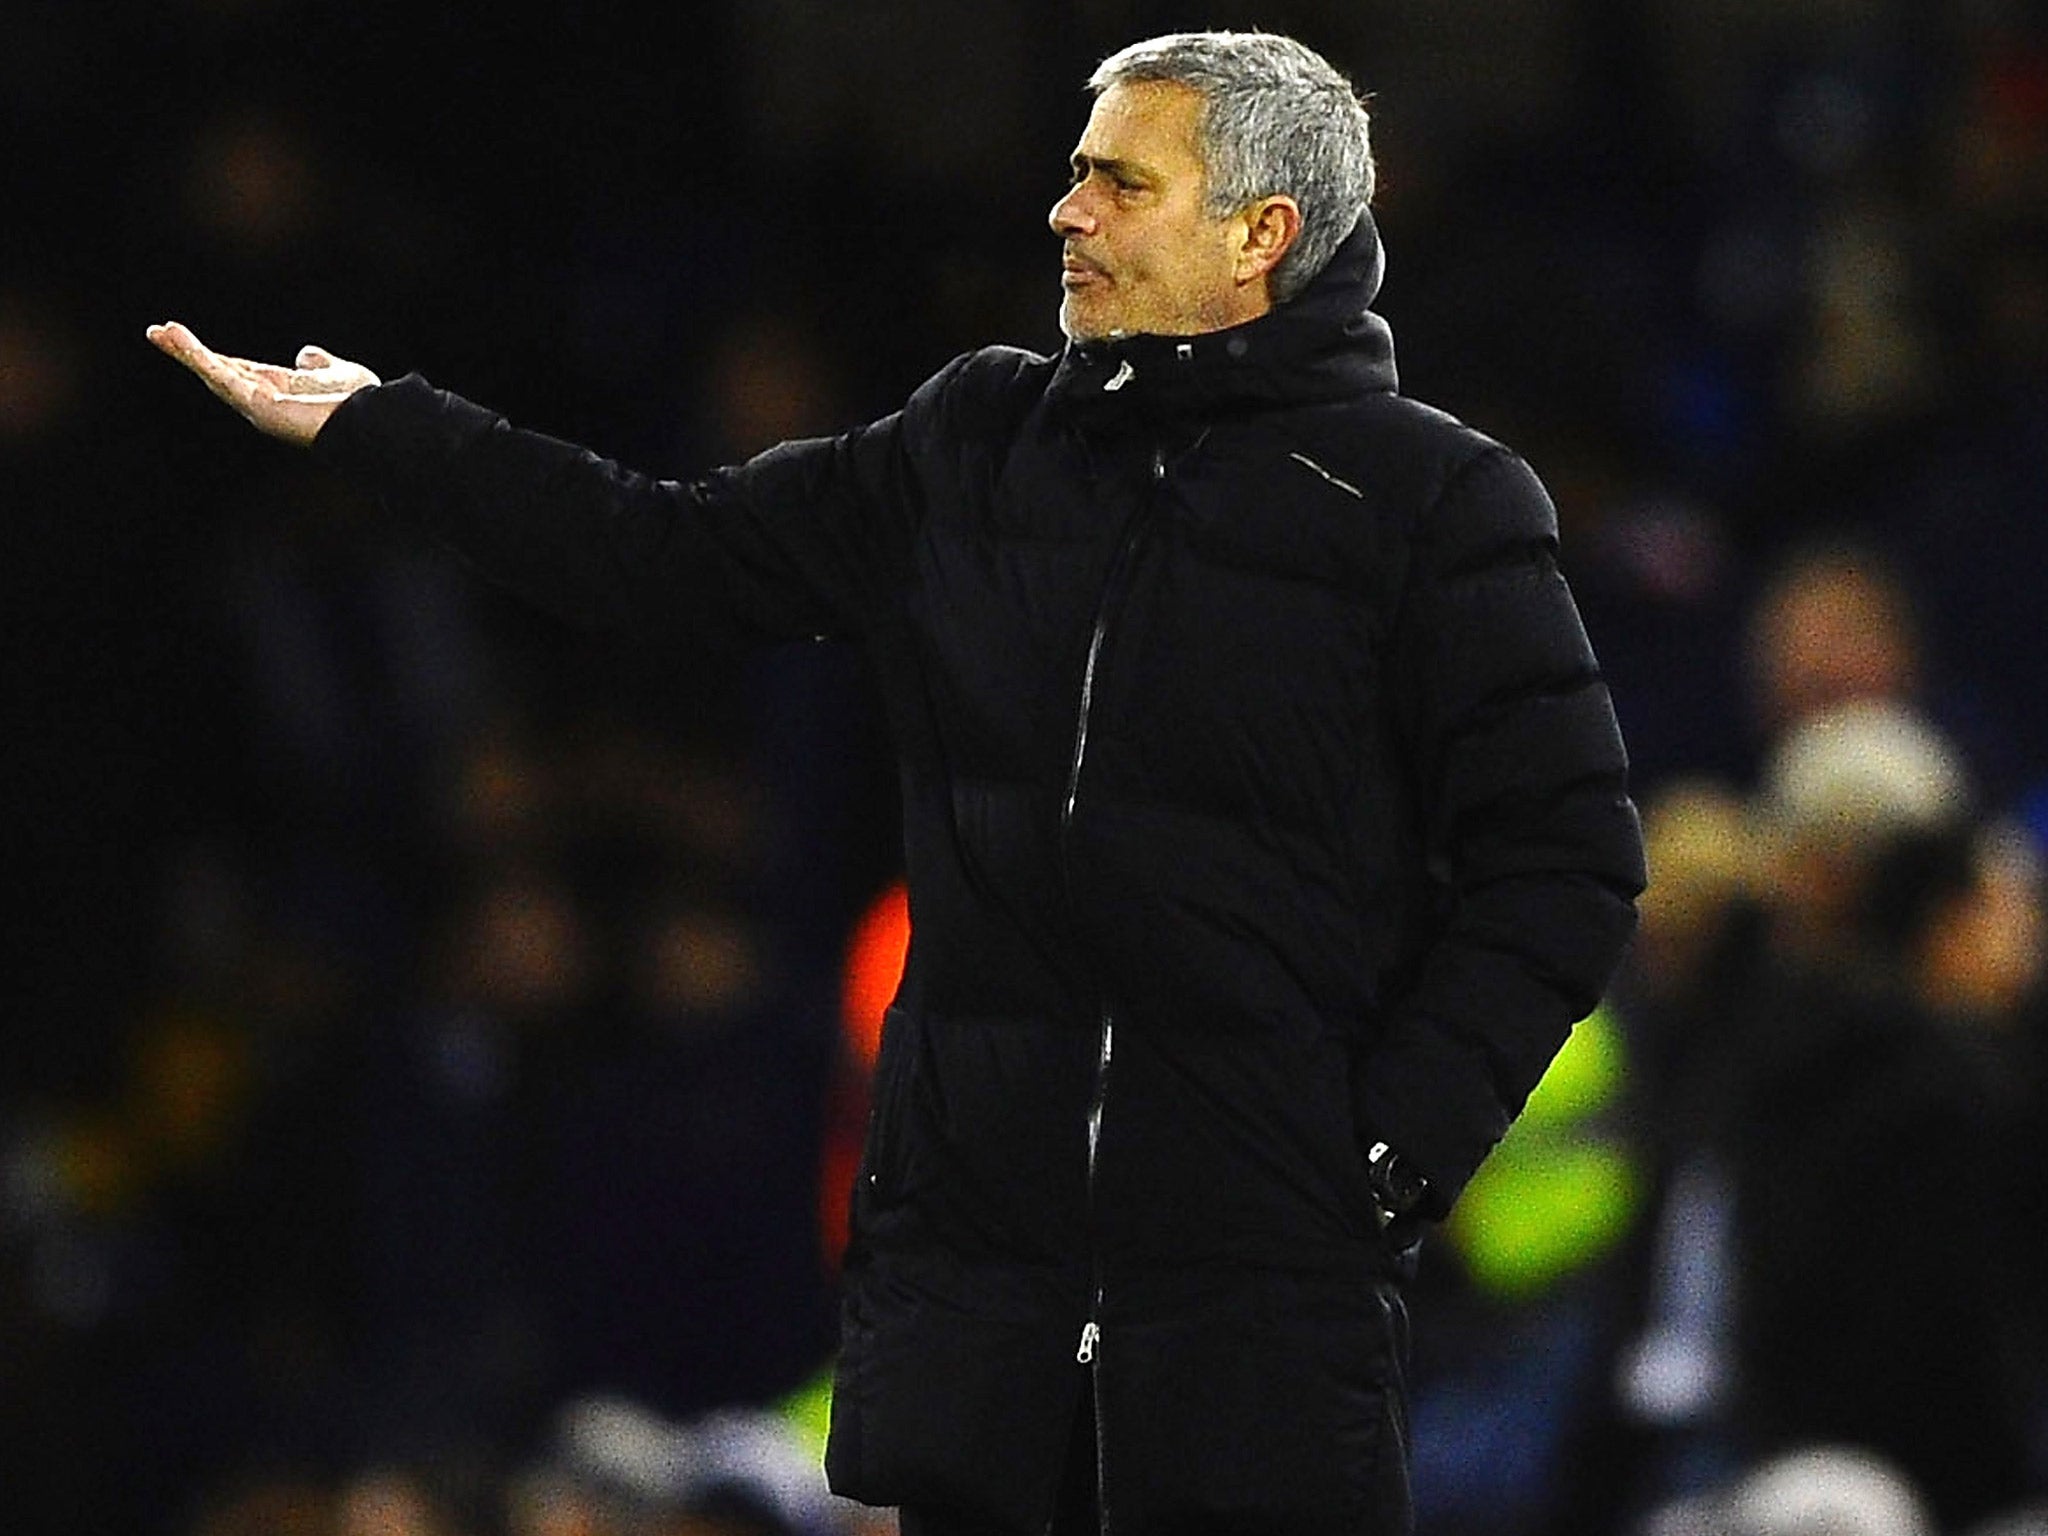 Jose Mourinho makes a gesture from the sideline